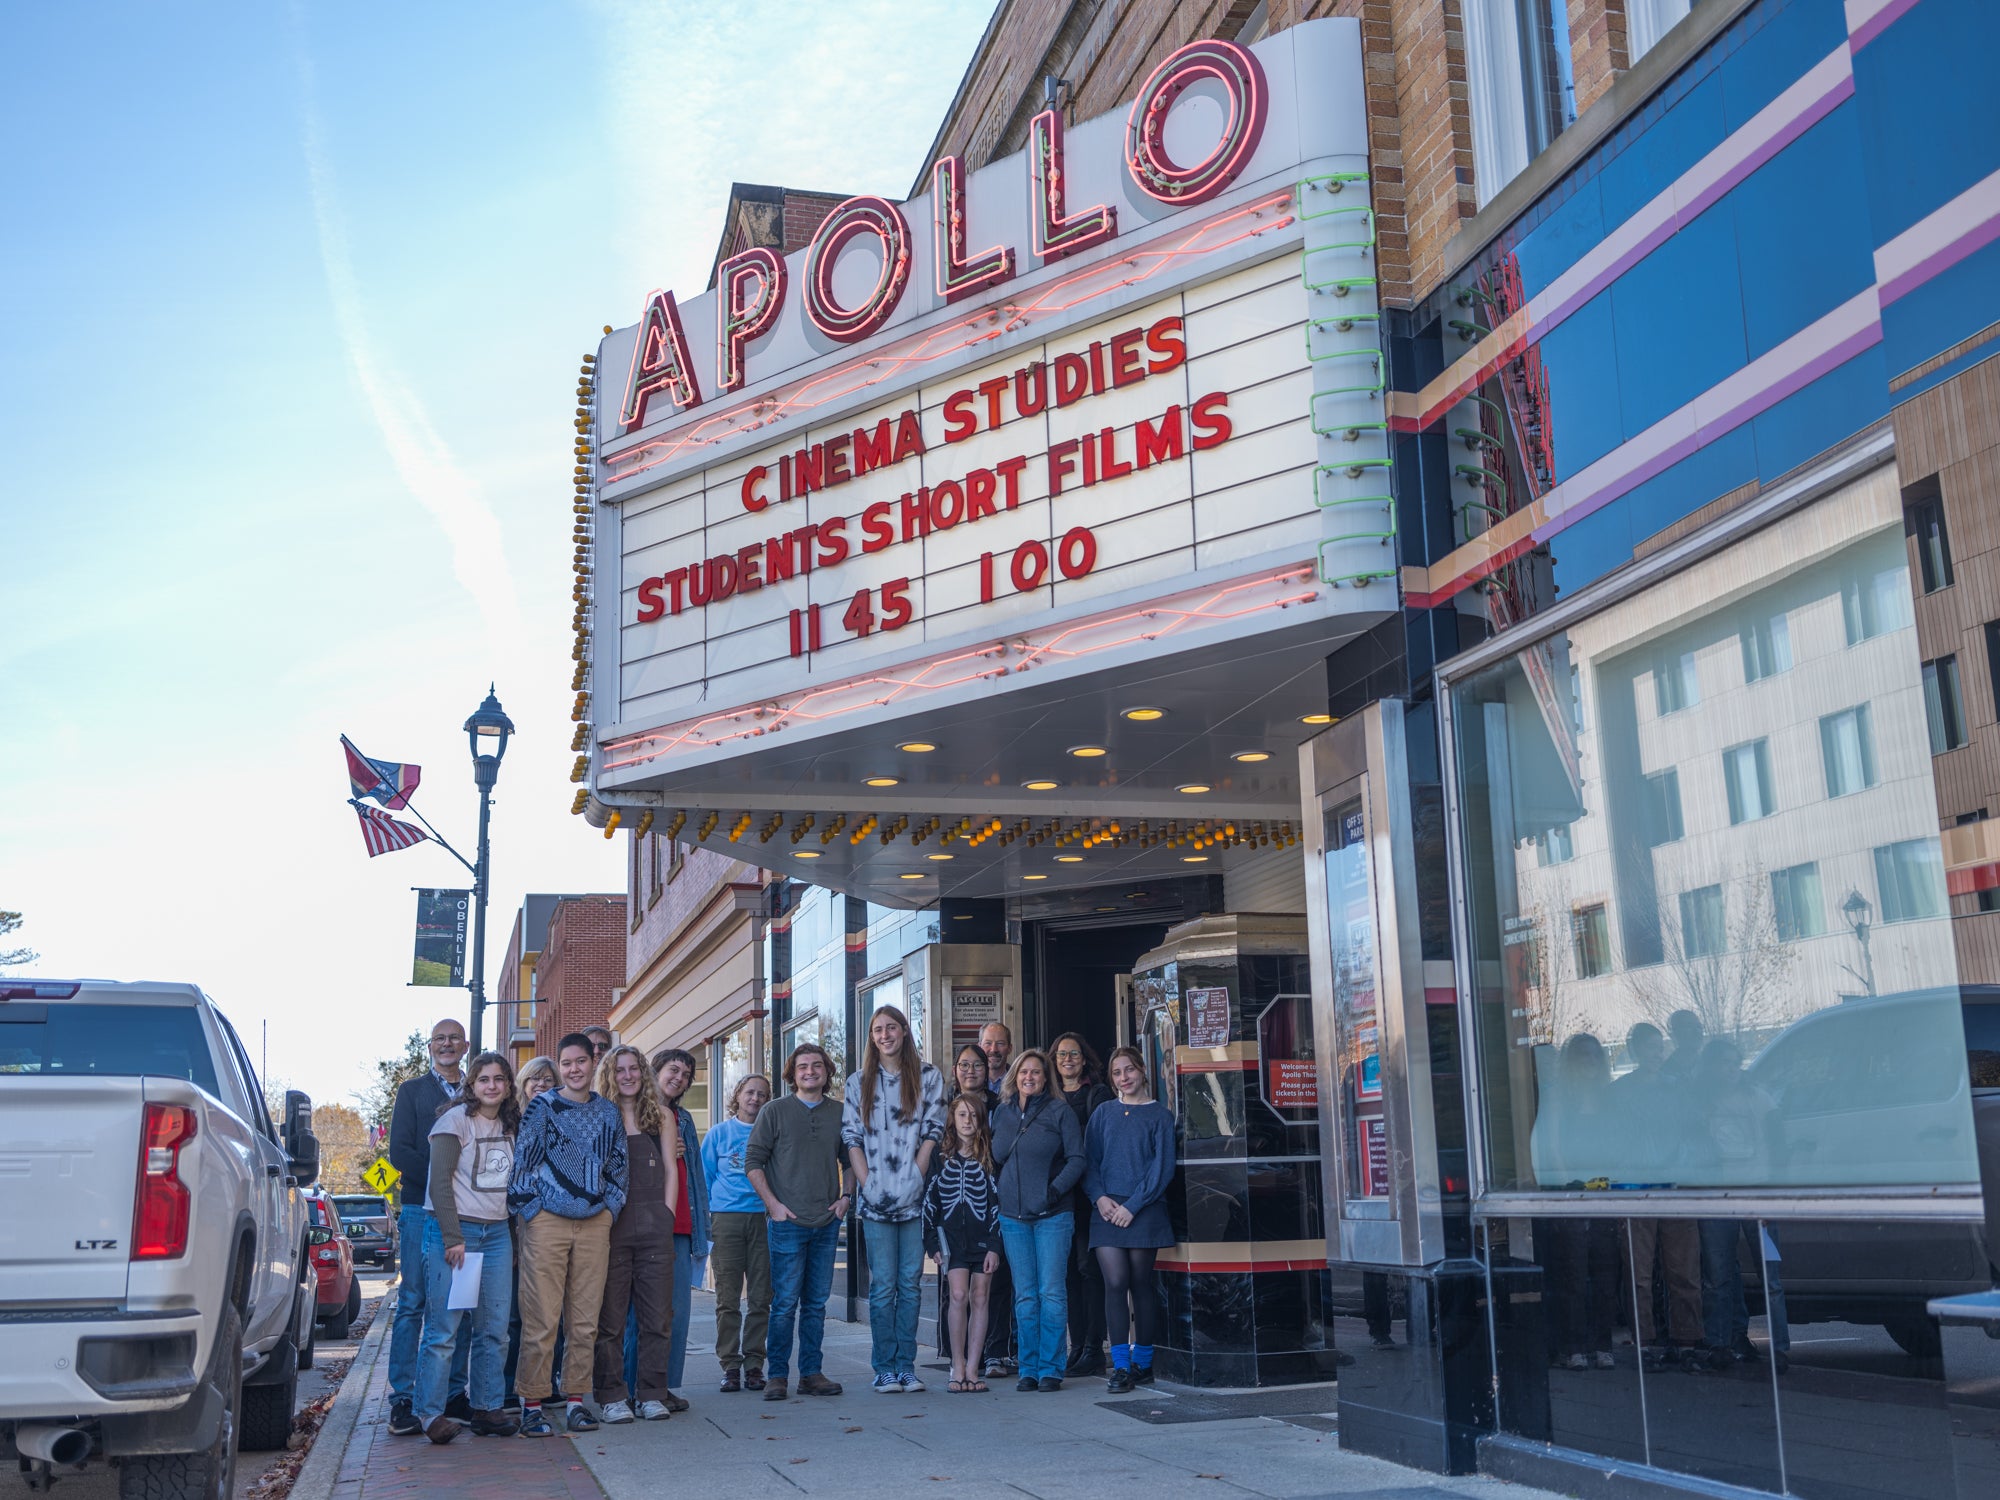 A group of people standing under the movie theater Apollo marquis and smiling for the camera